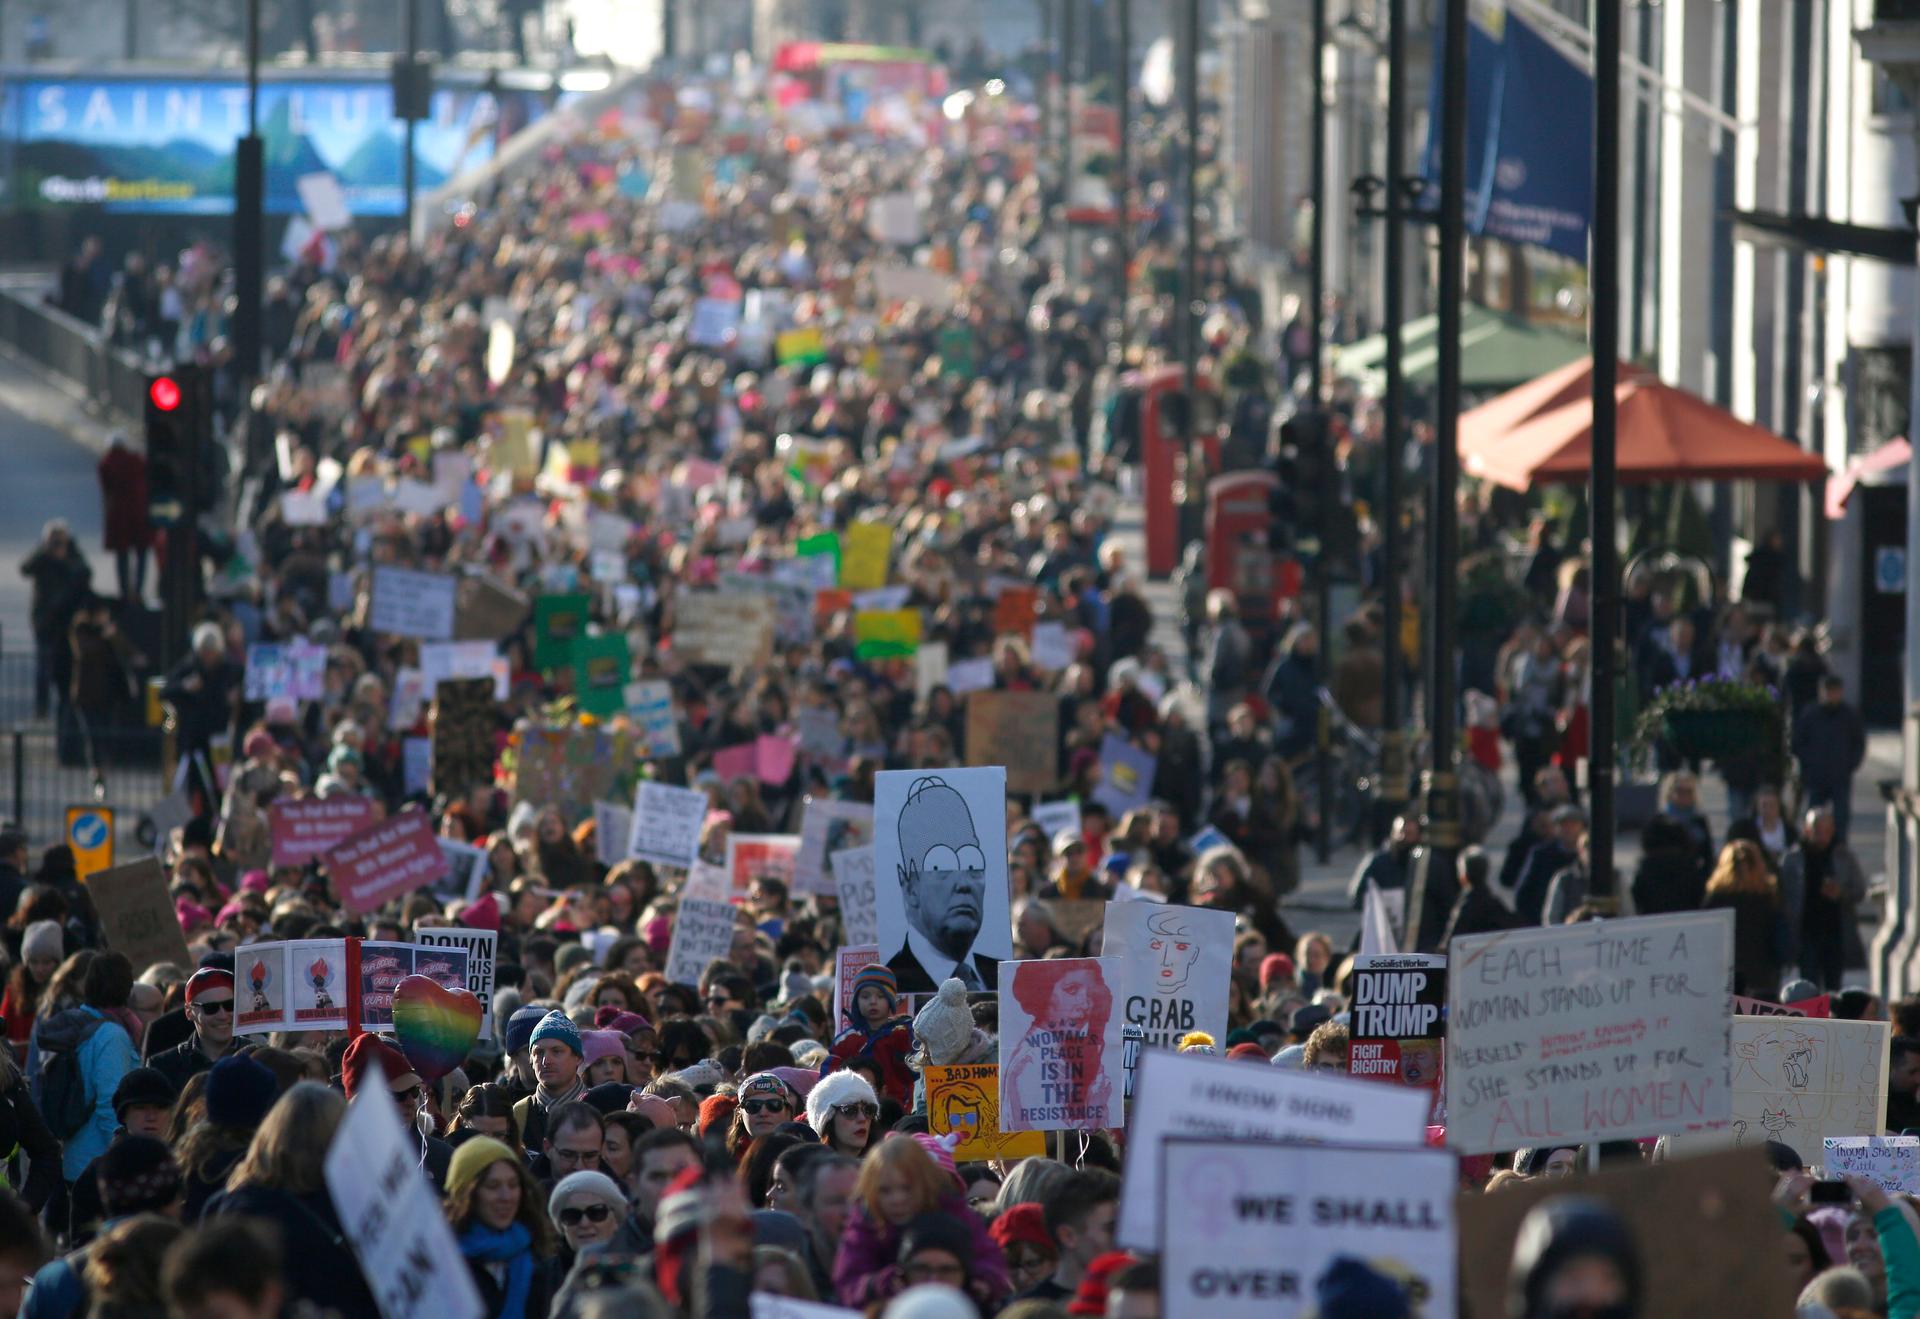 Protesters take part in the Women's March on London, as they walk from the American Embassy to Trafalgar Square, in central London